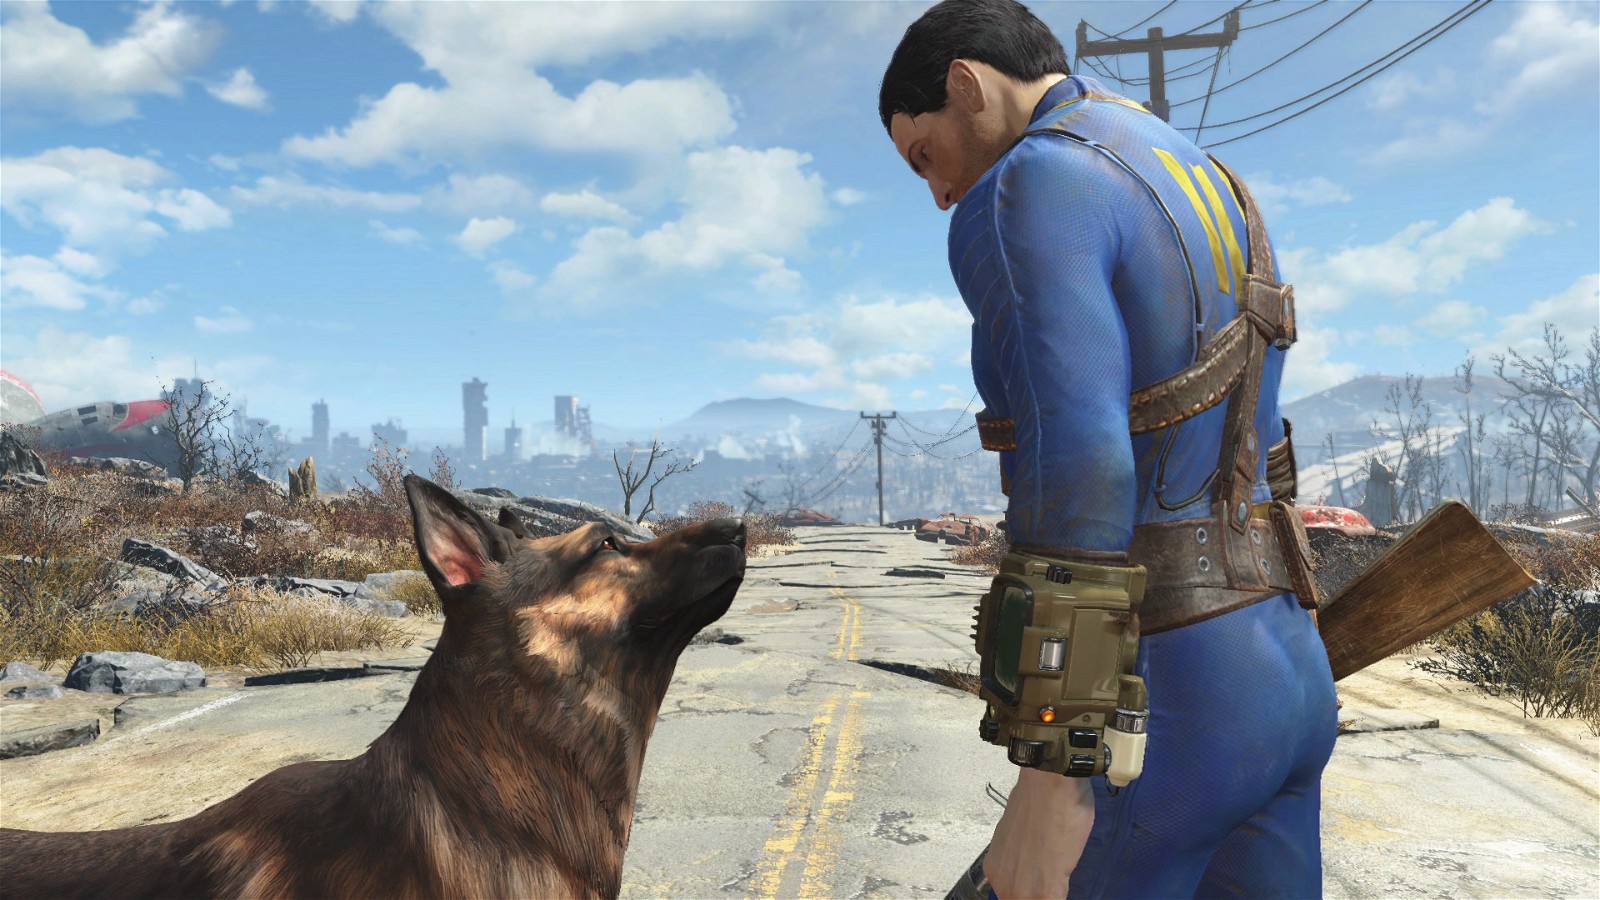 Fallout's popularity has skyrocketed in the past few weeks, so Xbox may focus on it more.